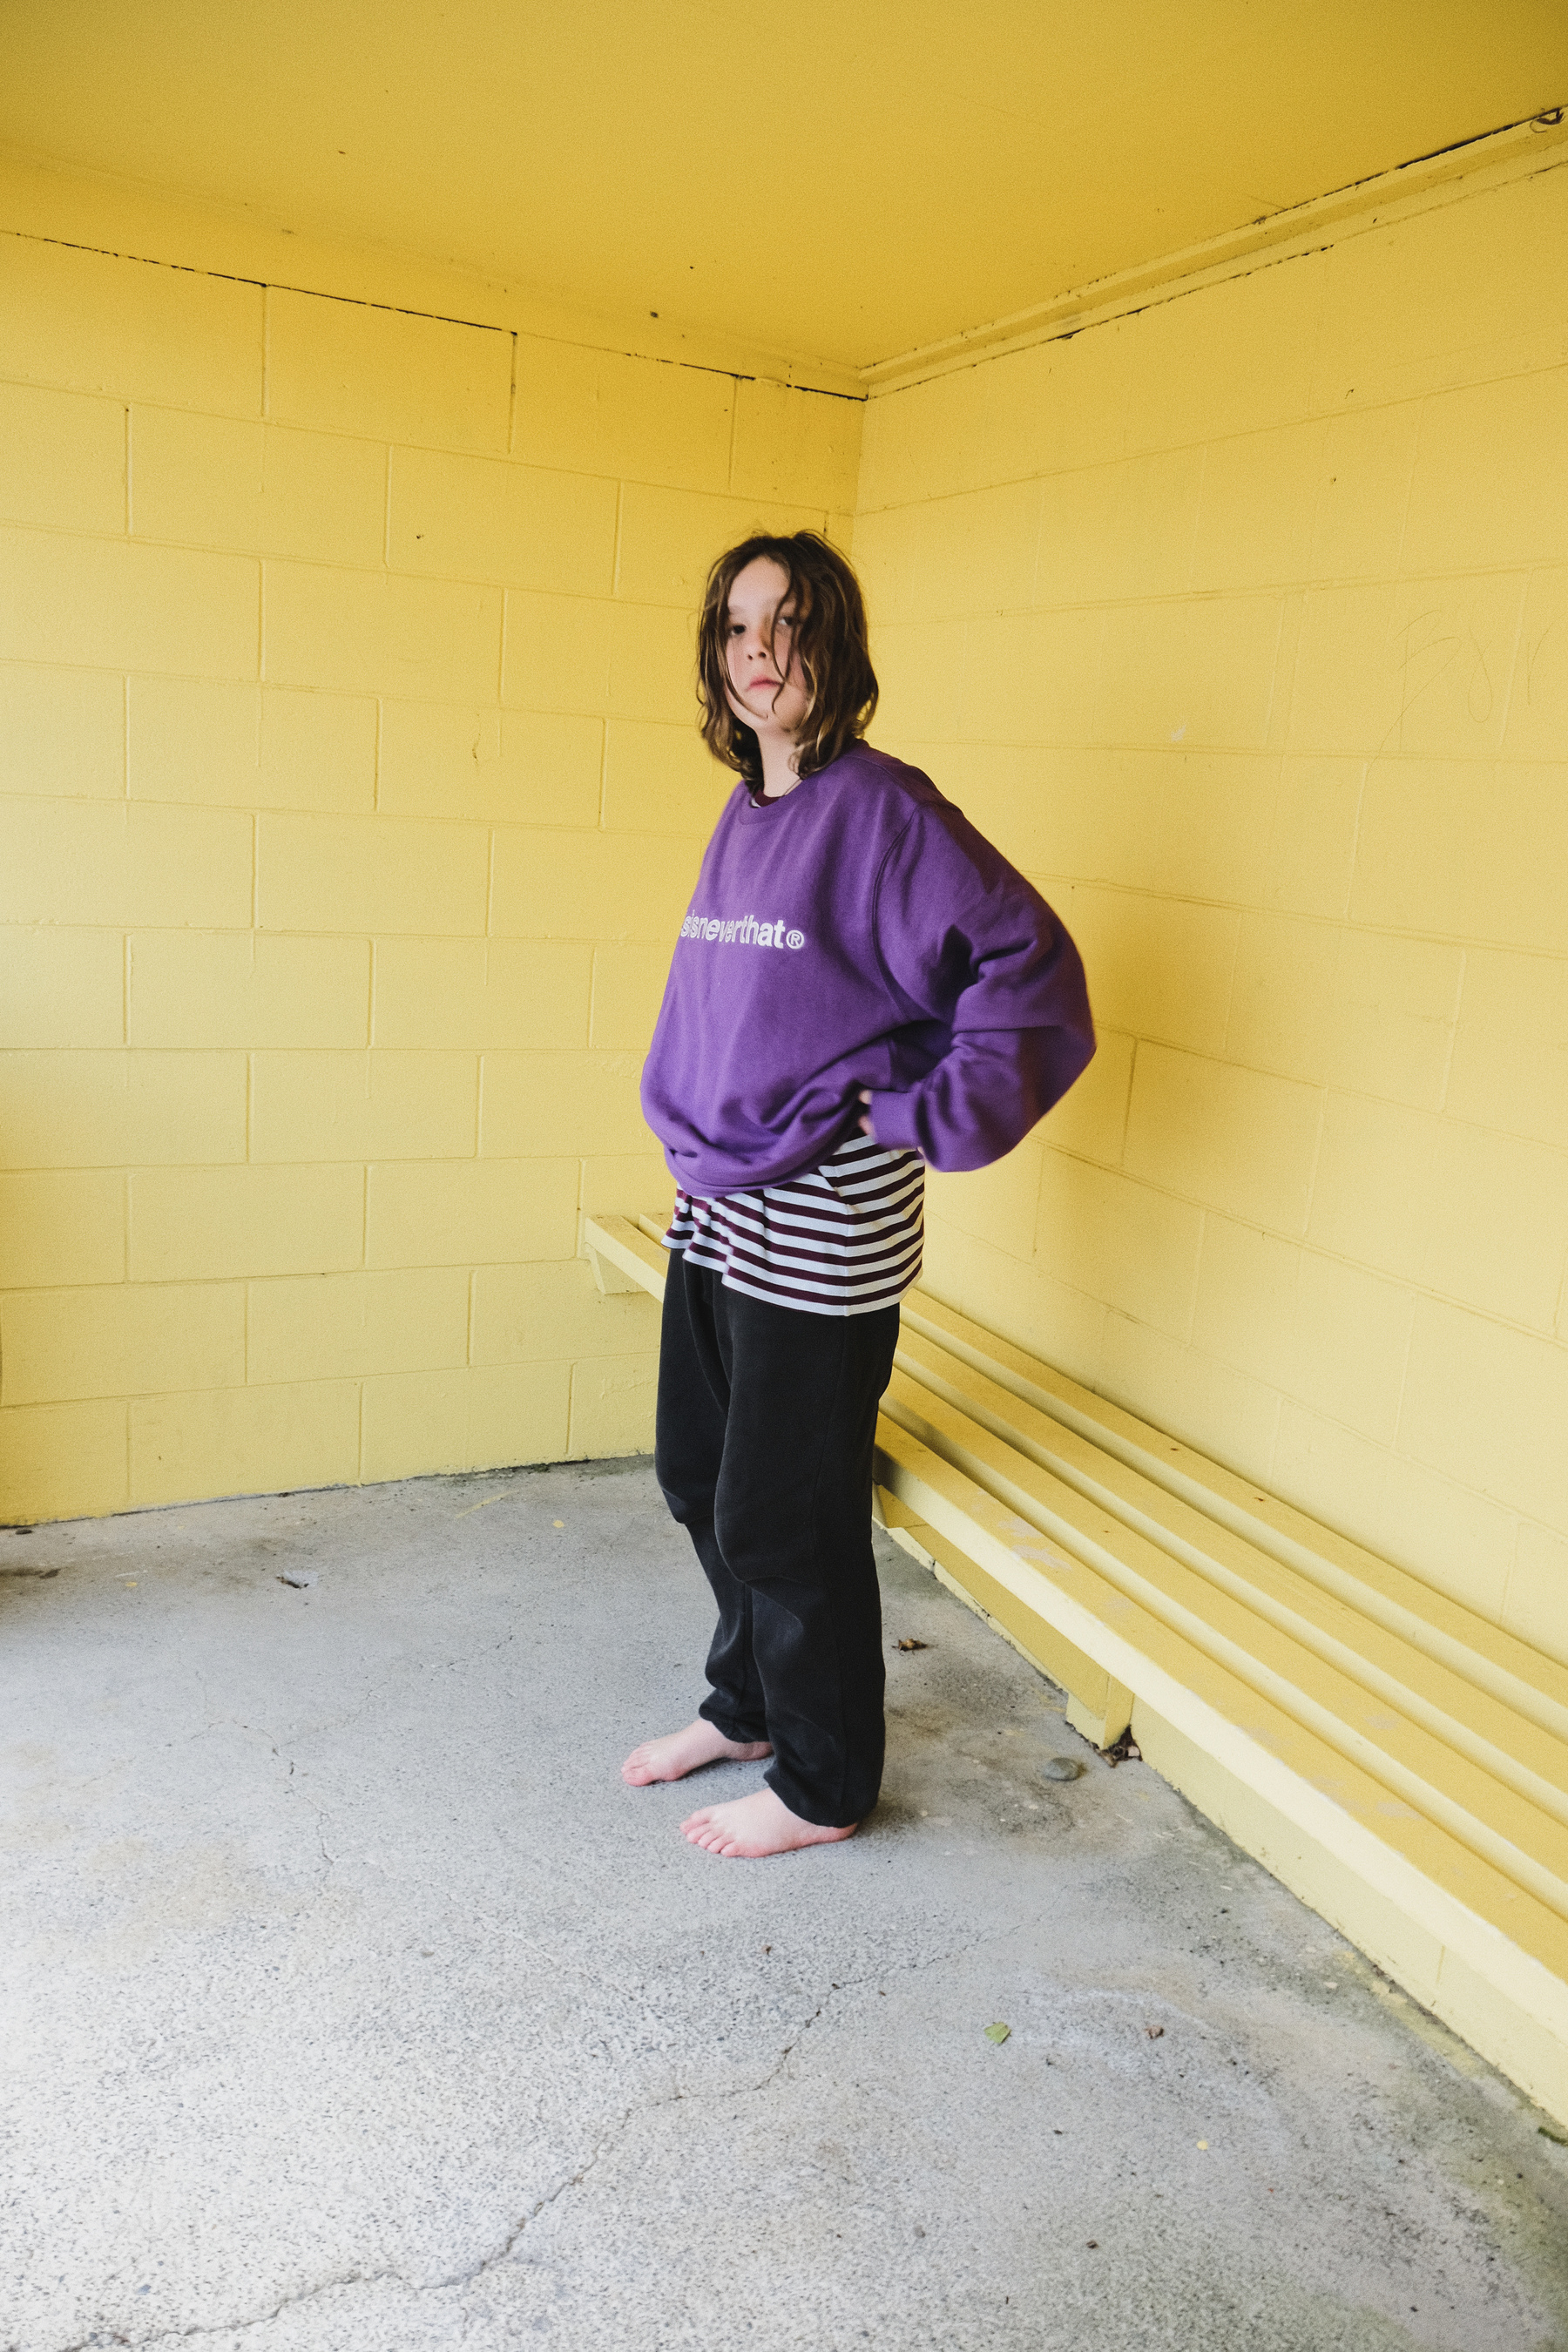 A girl putting on a purple sweatshirt in a yellow bus shelter. 